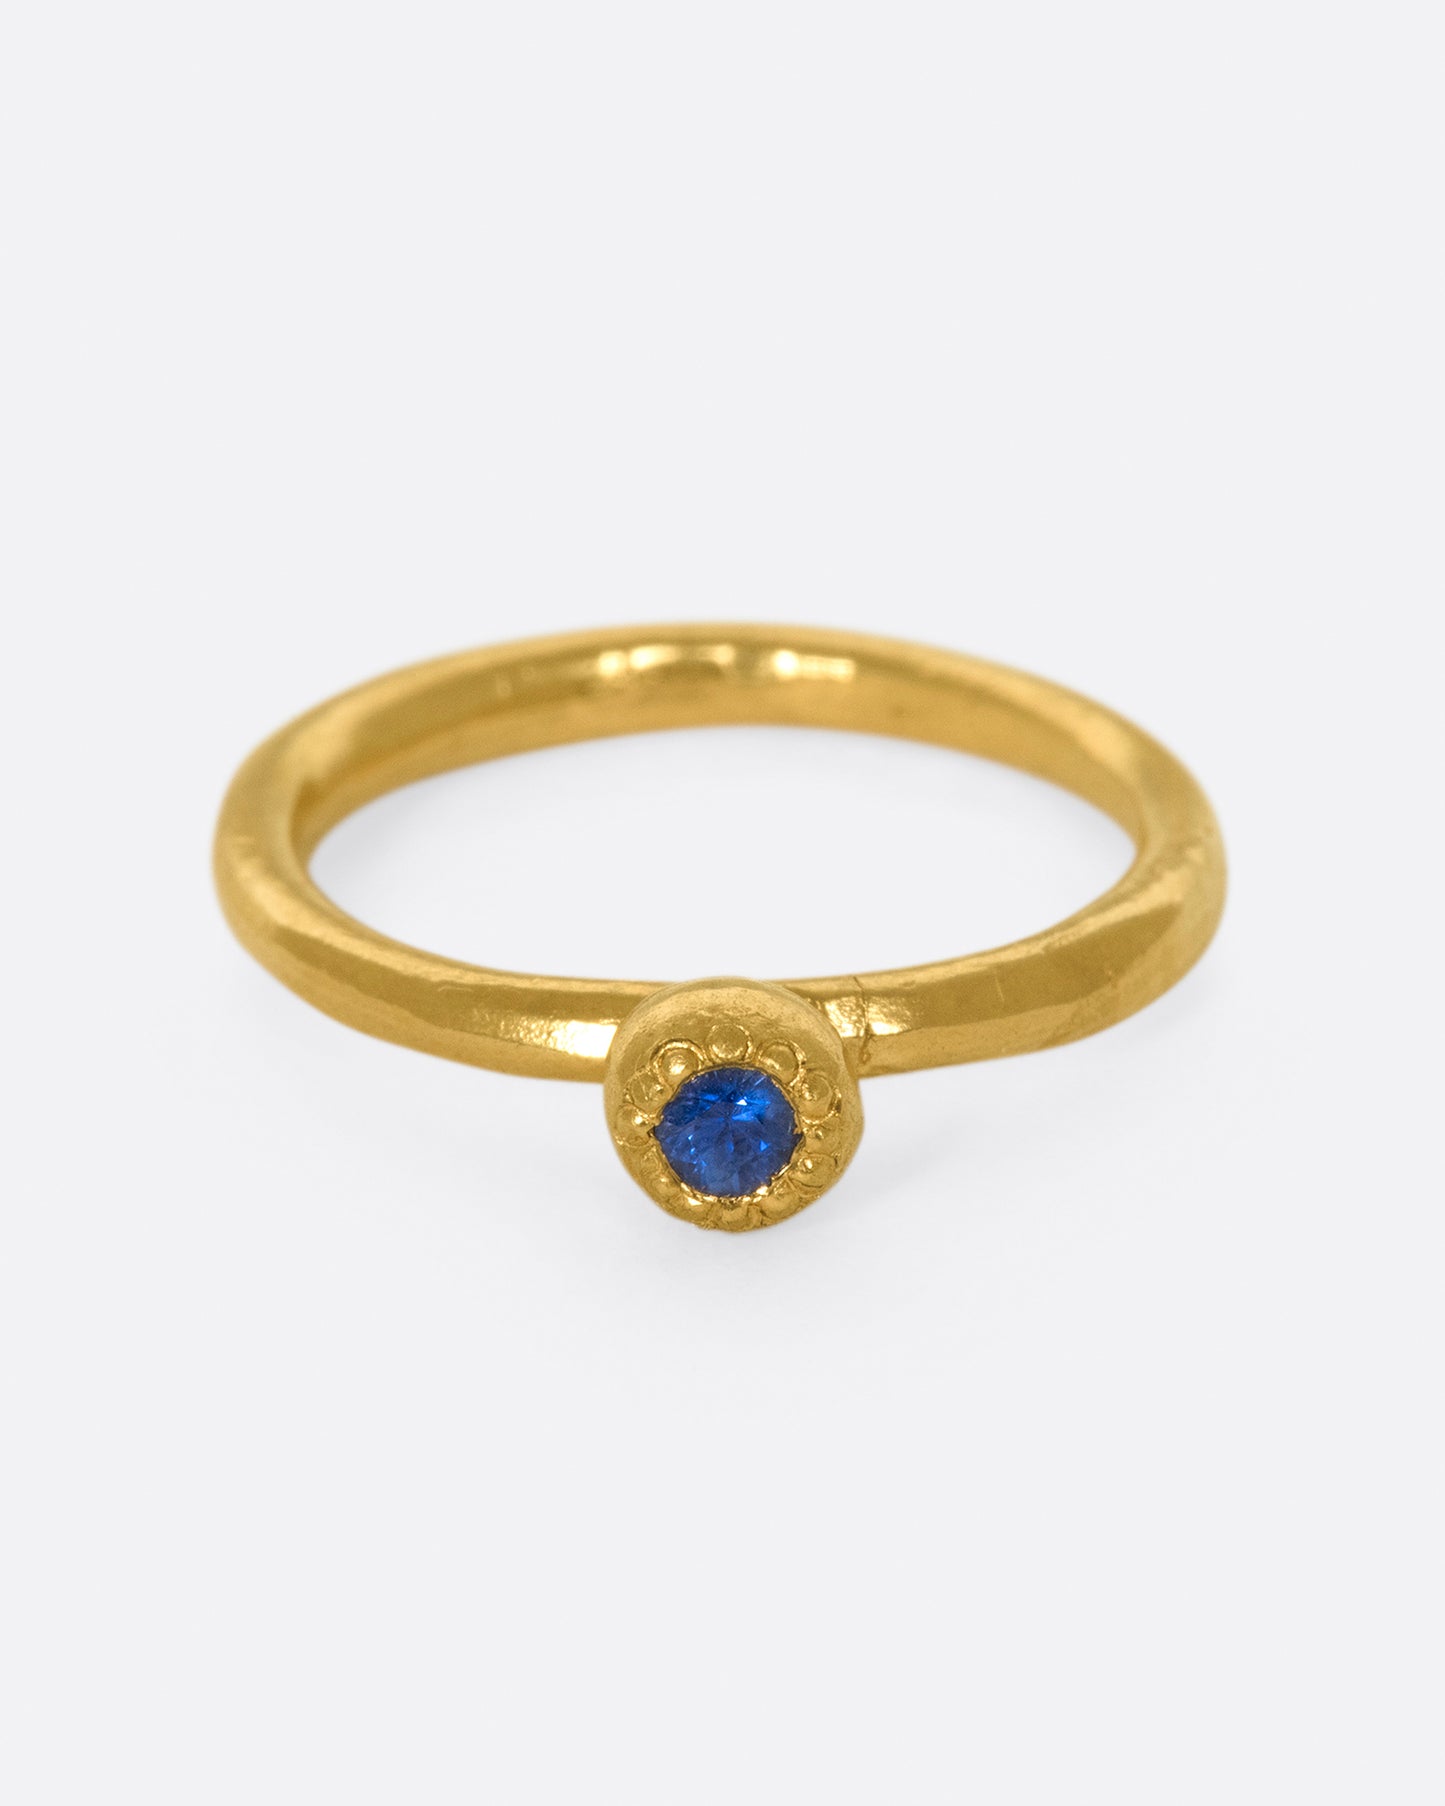 A deep blue sapphire solitaire ring; perfect on its own or stacked with its emerald counterpart.